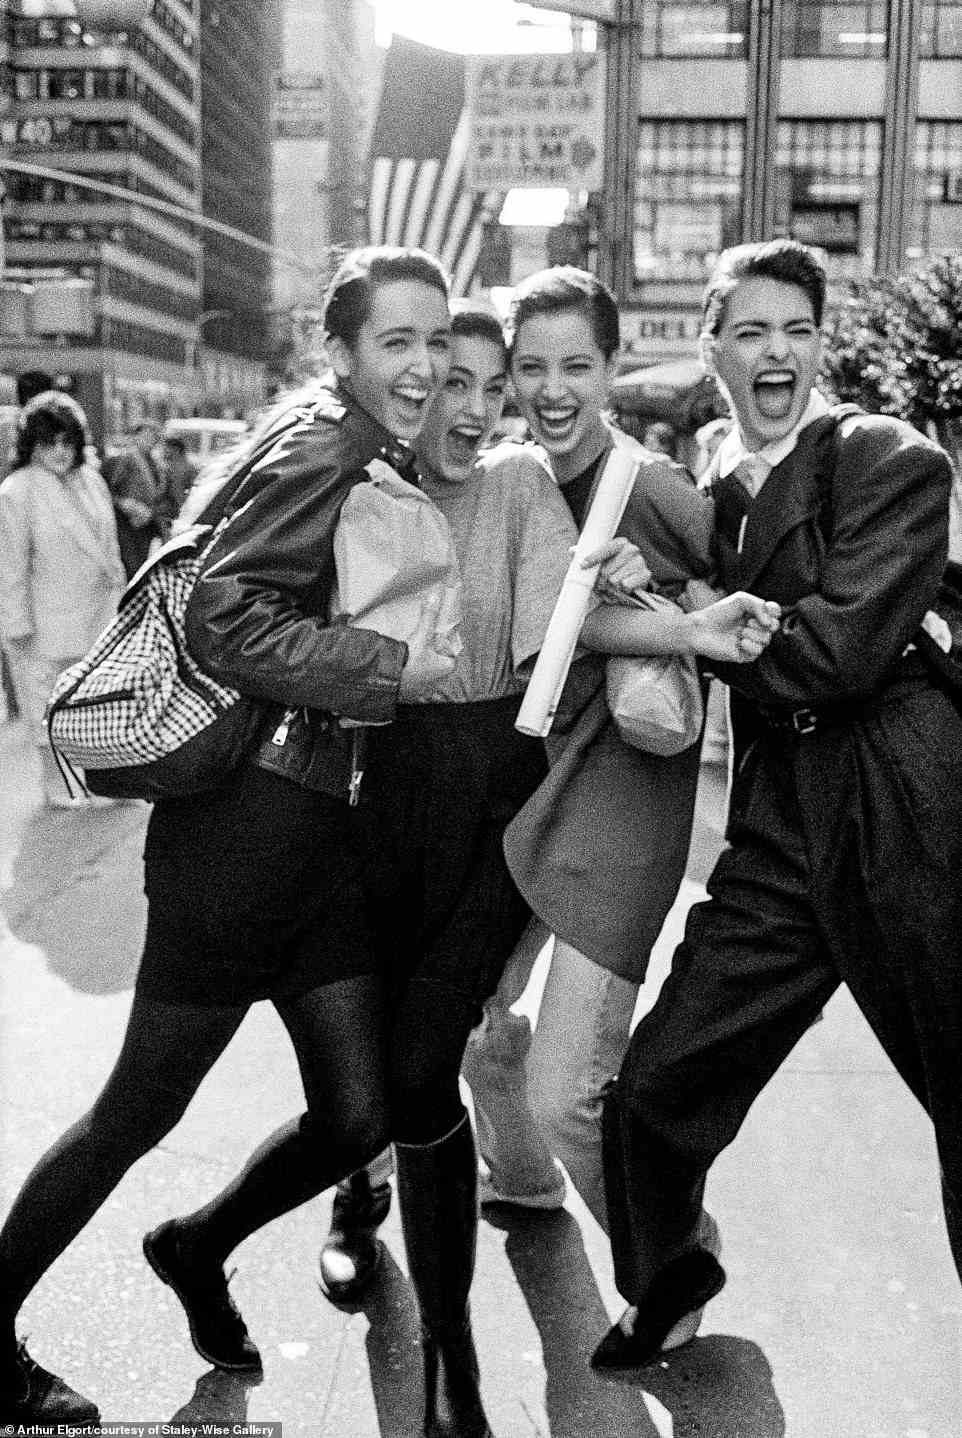 Elgort took this playful snapshot of Gail Elliott, Yasmin Le Bon, Christy Turlington and Linda Evangelista (left to right) laughing on a New York City sidewalk in 1987